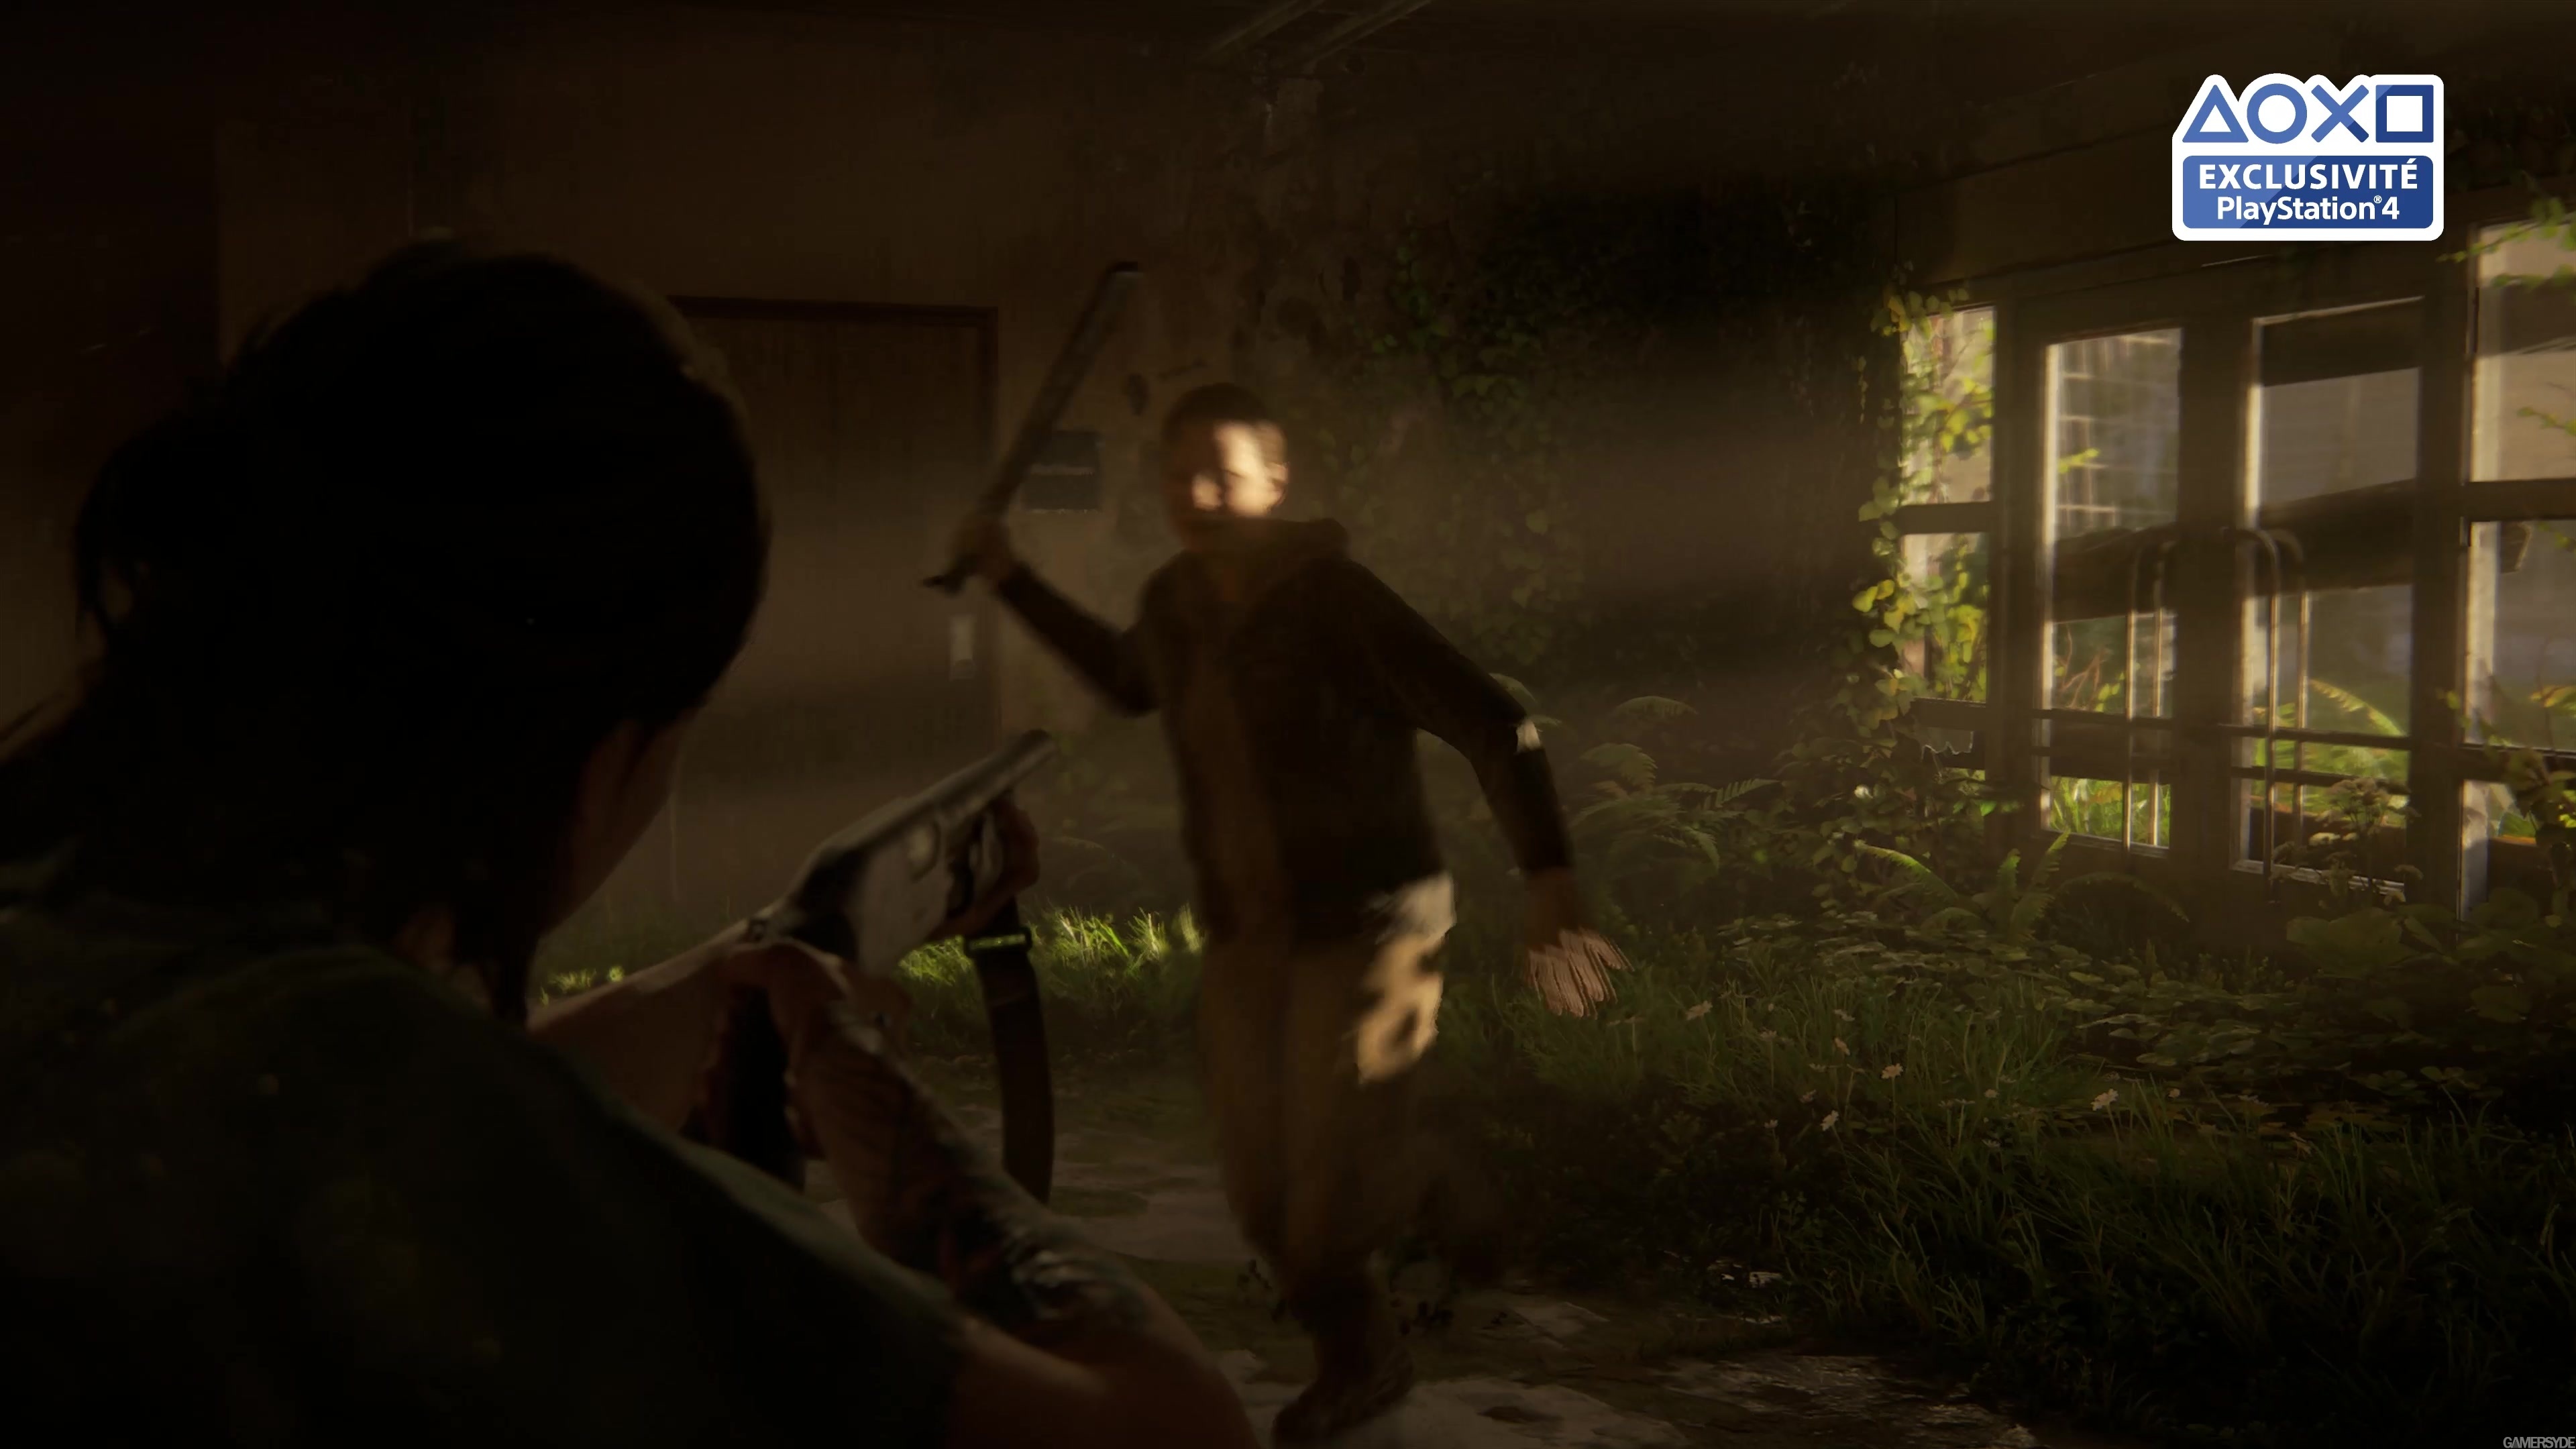 Watch The Last of Us Part 2's new gameplay trailer here